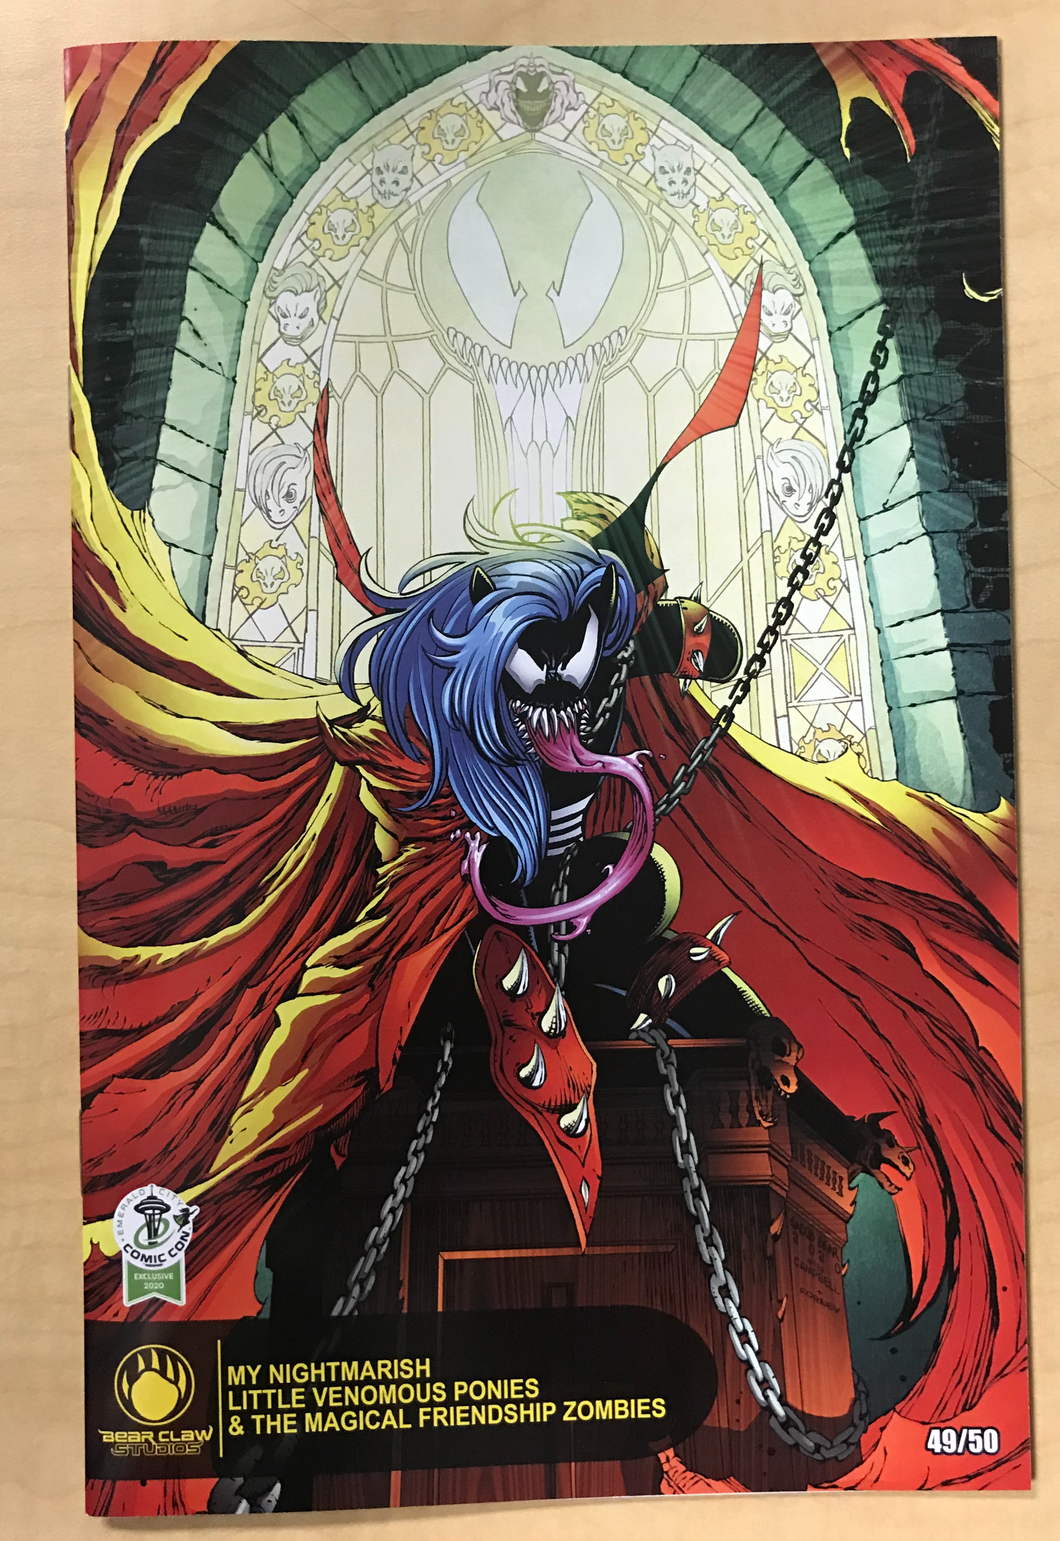 My Nightmarish Little Venomous Ponies & The Magical Friendship Zombies #1 Spawn #300 J Scott Campbell Homage Variant cover by Jacob Bear 2020 ECC Exclusive limited to only 50 copies!!!